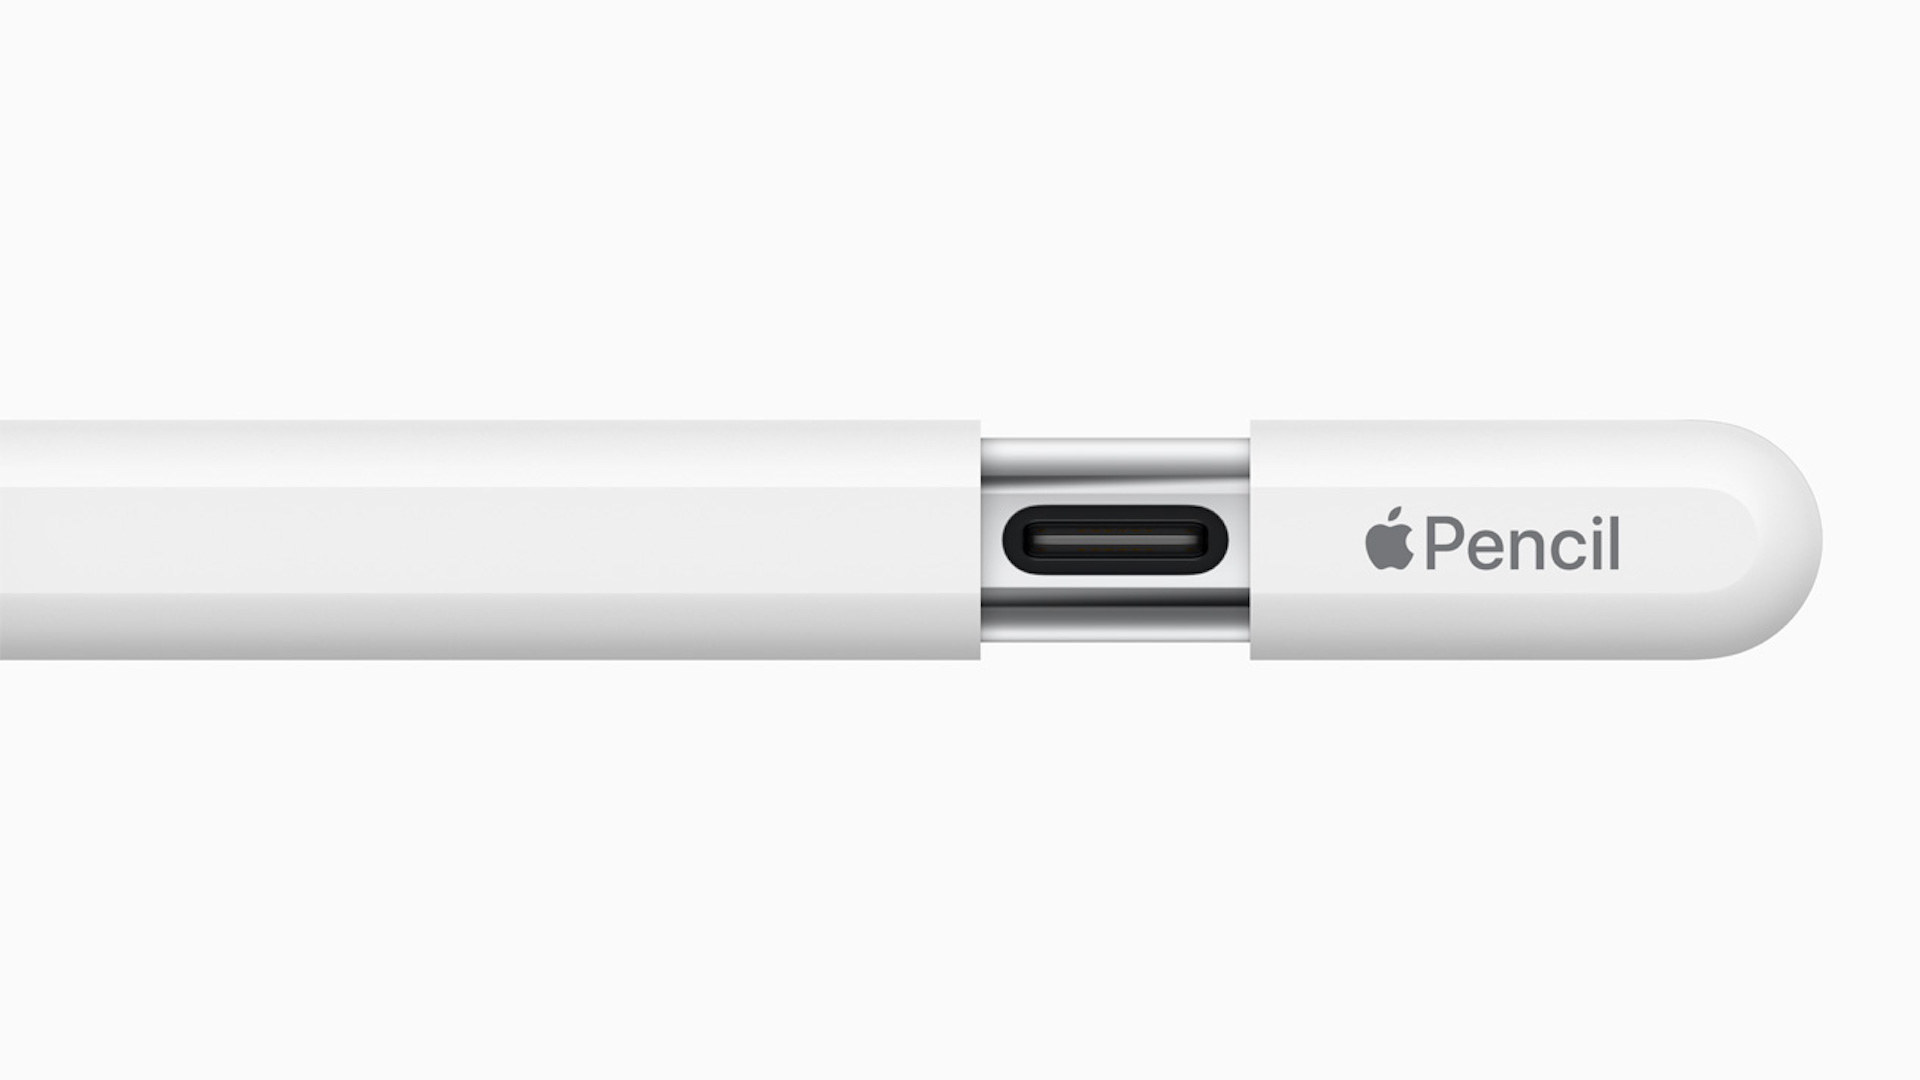 Apple unveils more affordable pencil, a game changer in digital creativity